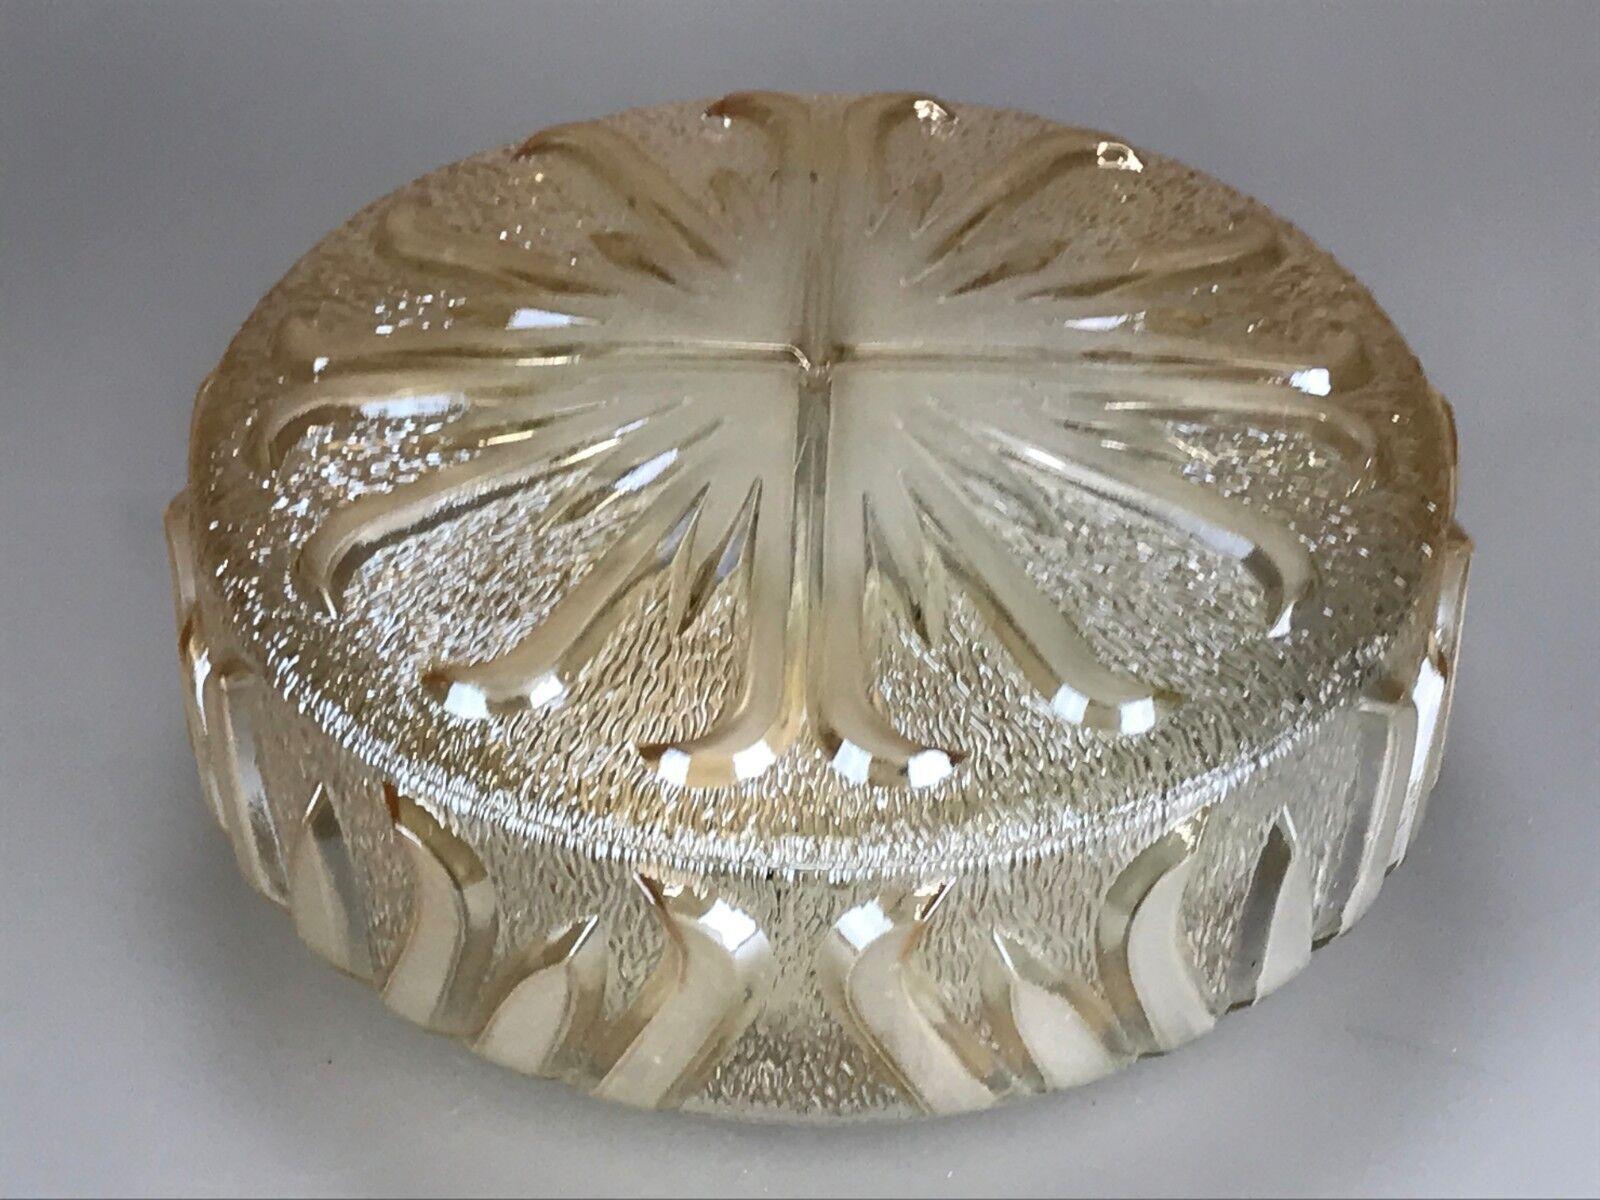 60s 70s Lamp luminaire plafoniere flush mount glass Space Age design

Object: plafoniere

Manufacturer:

Condition: good

Age: around 1960-1970

Dimensions:

Diameter = 25cm
Height = 10cm

Other notes:

The pictures serve as part of